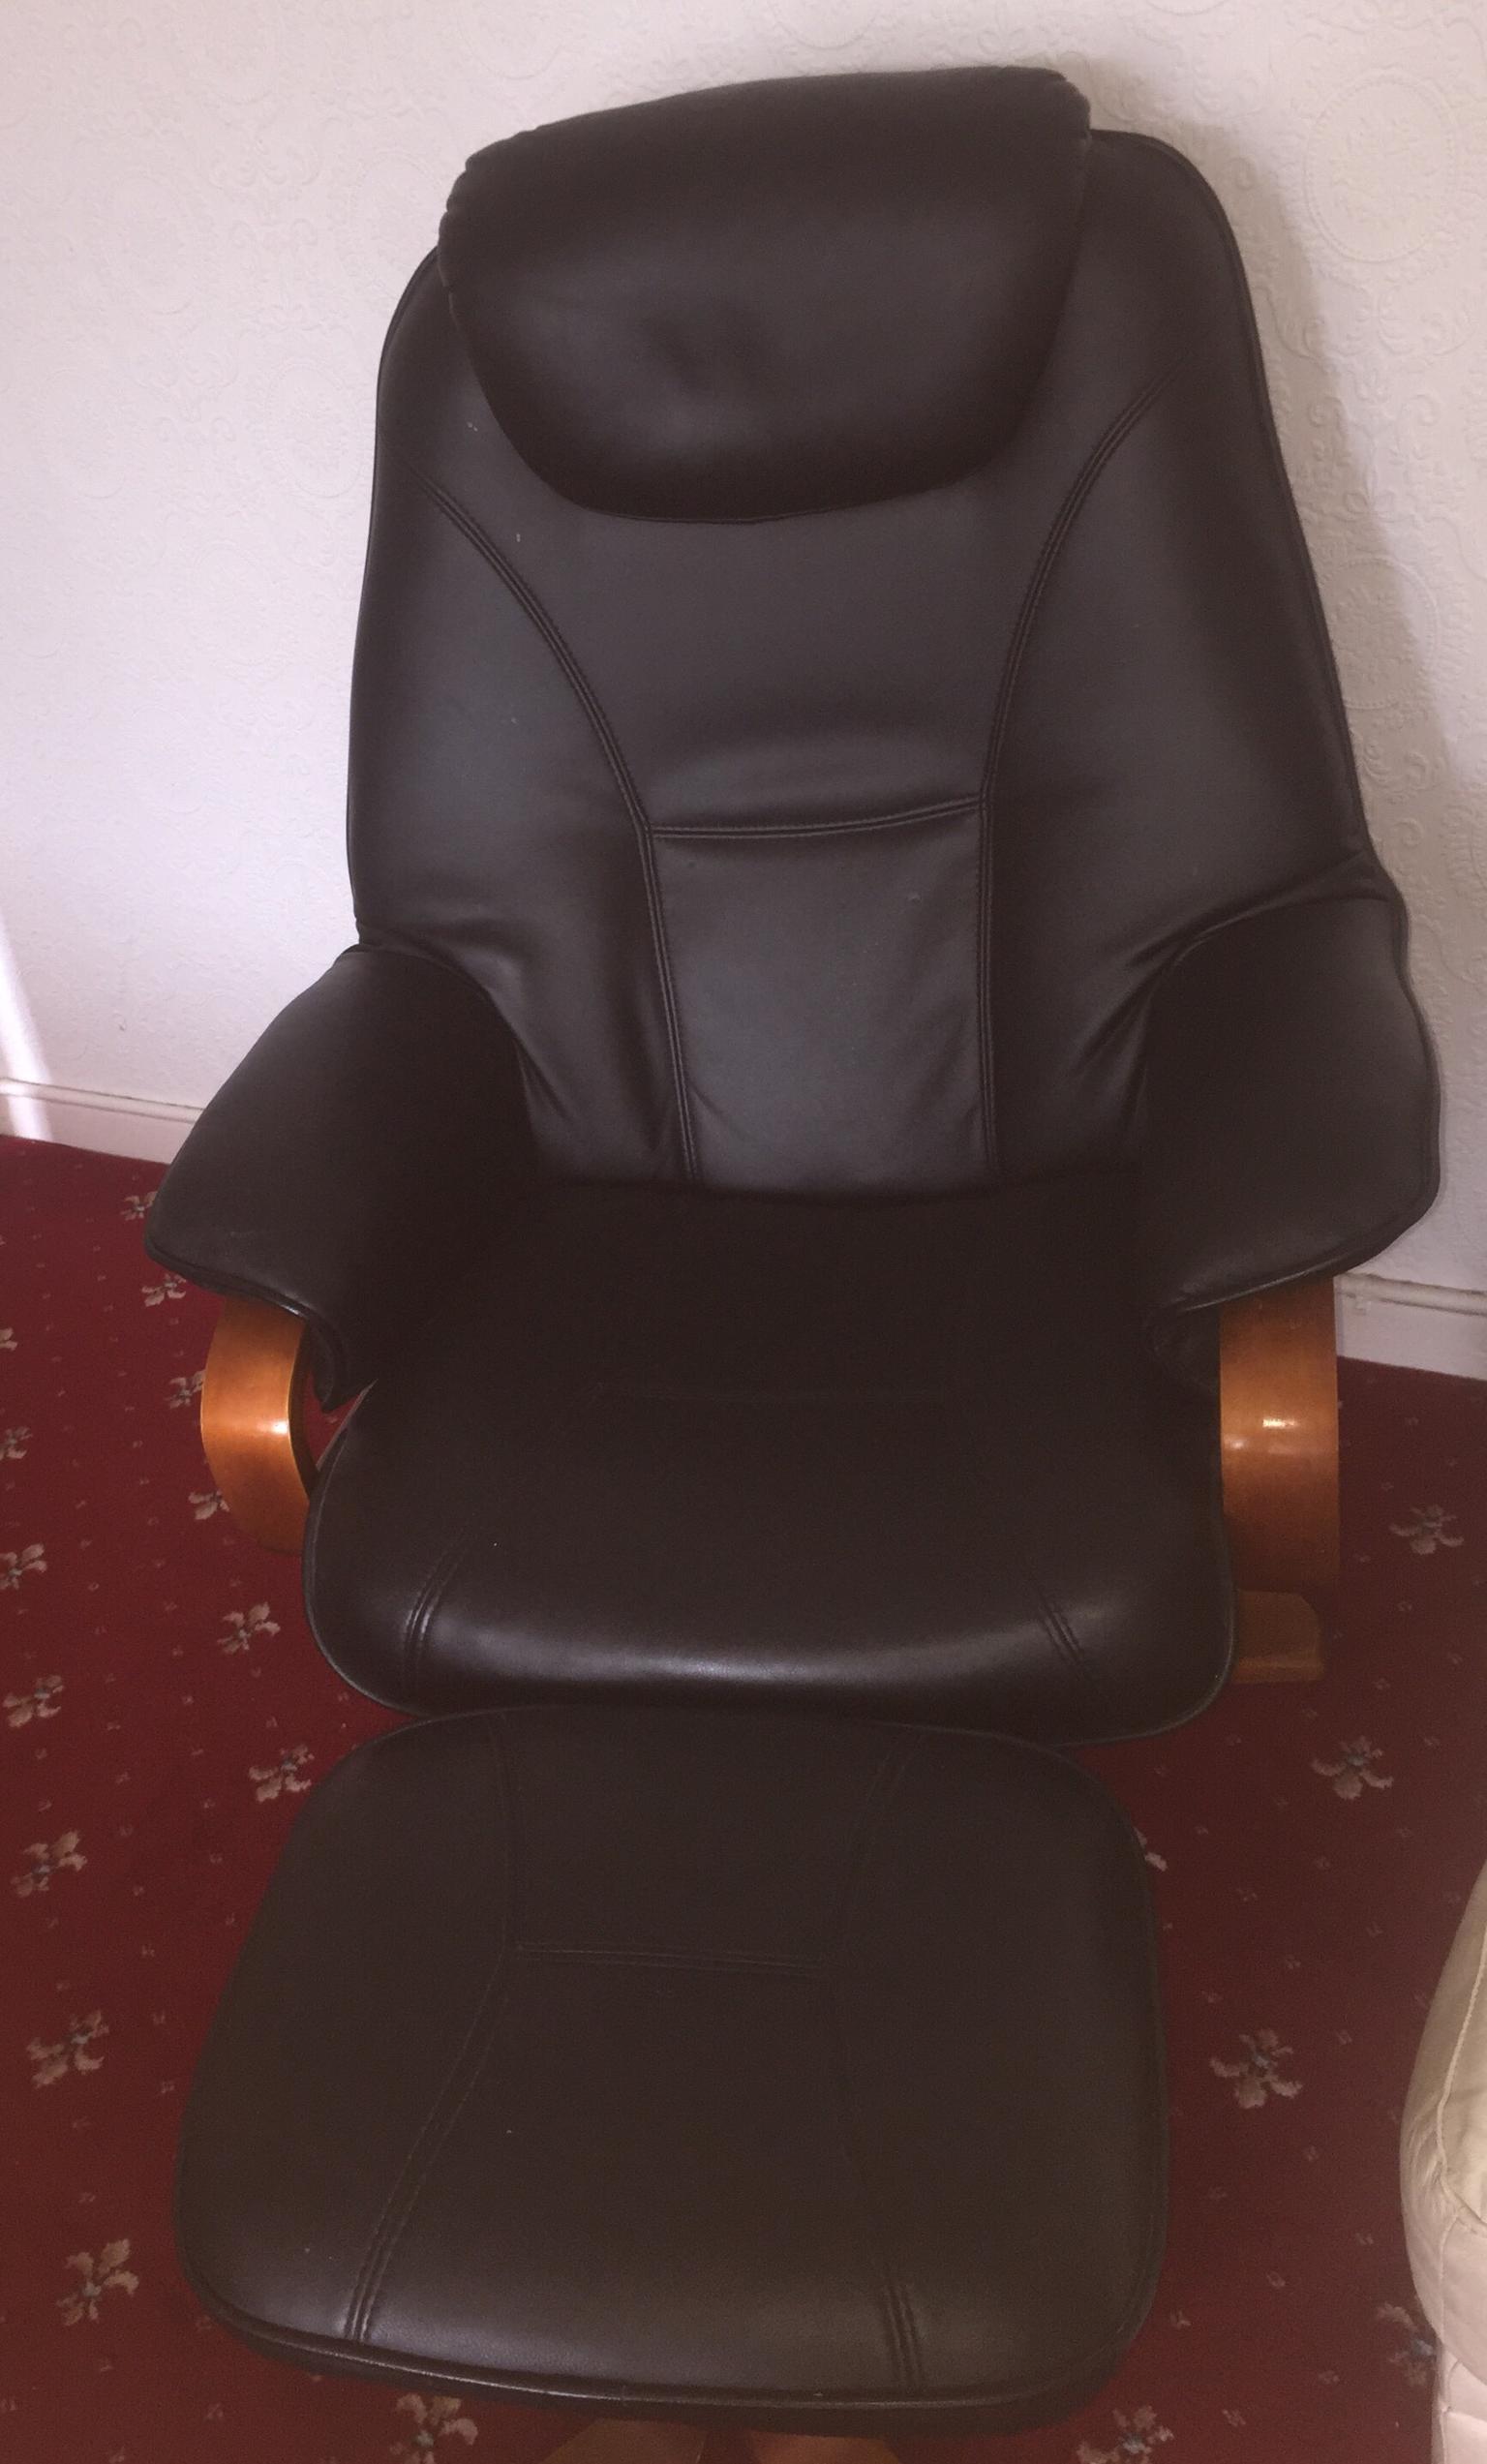 Black Leather Swivel Chair Footstool In Ls27 Morley For 80 00 For